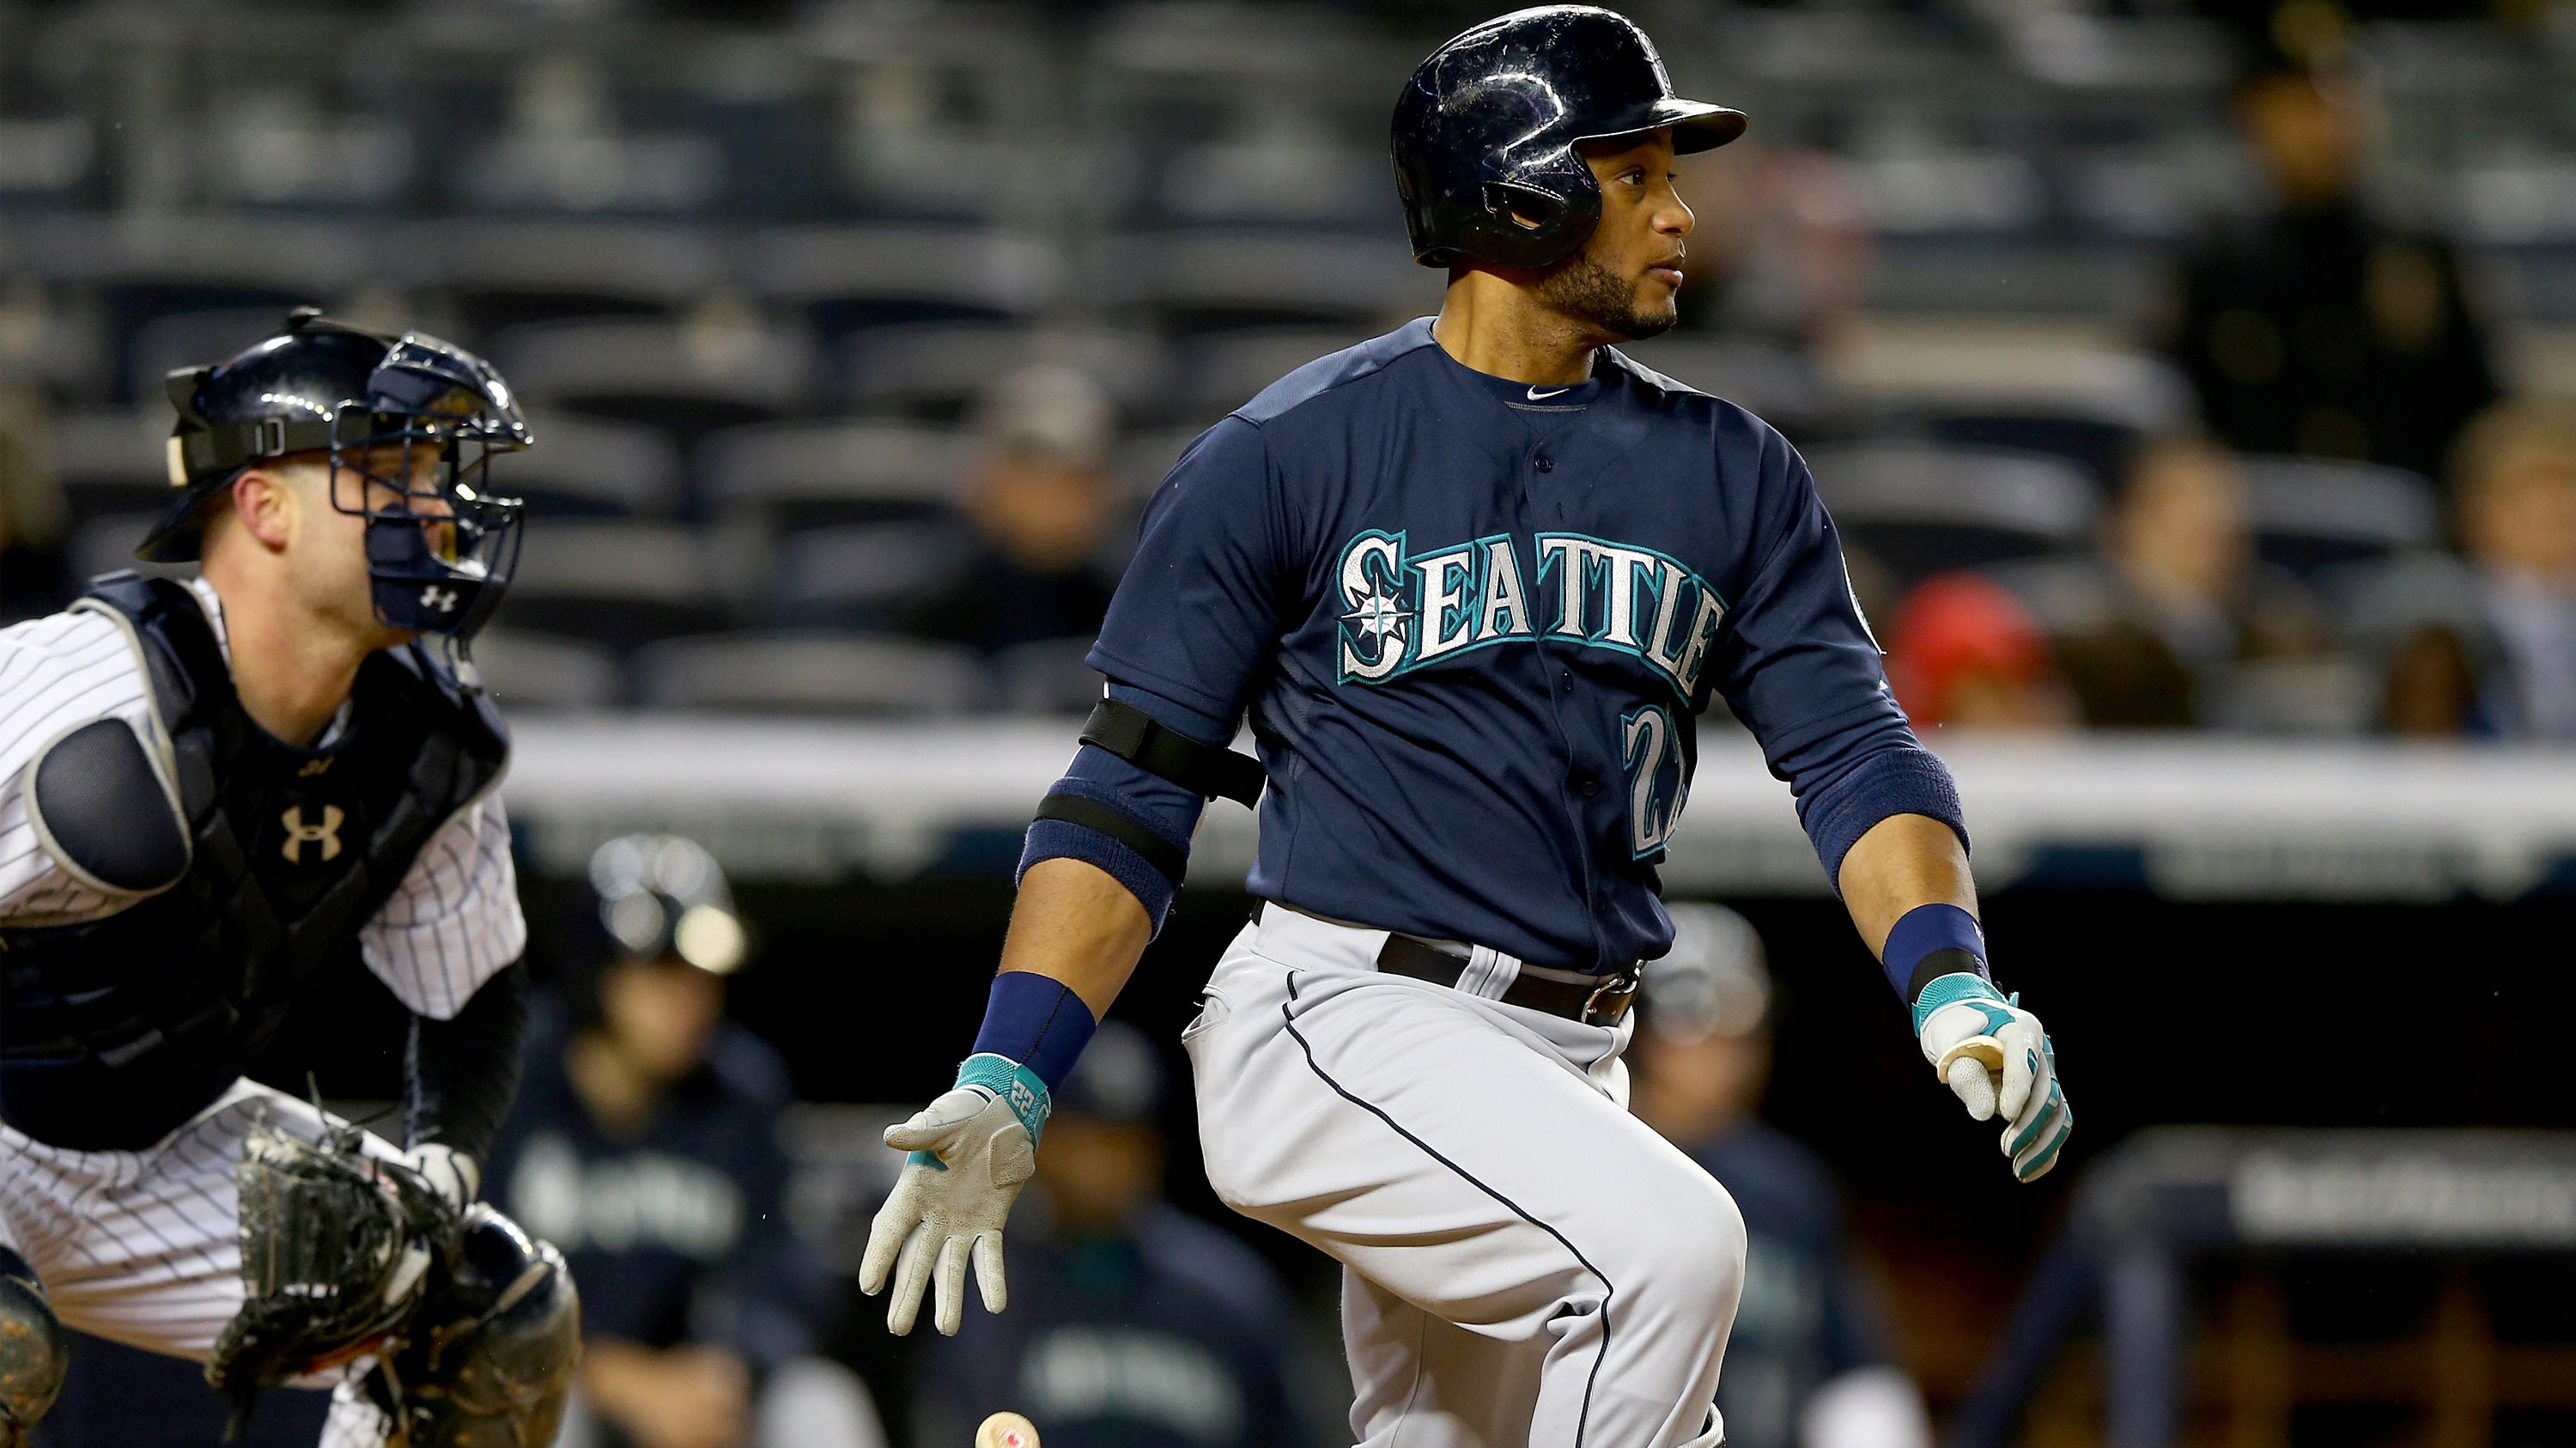 Robinson Cano Returns To New York And Gets Booed By Yankees Fans